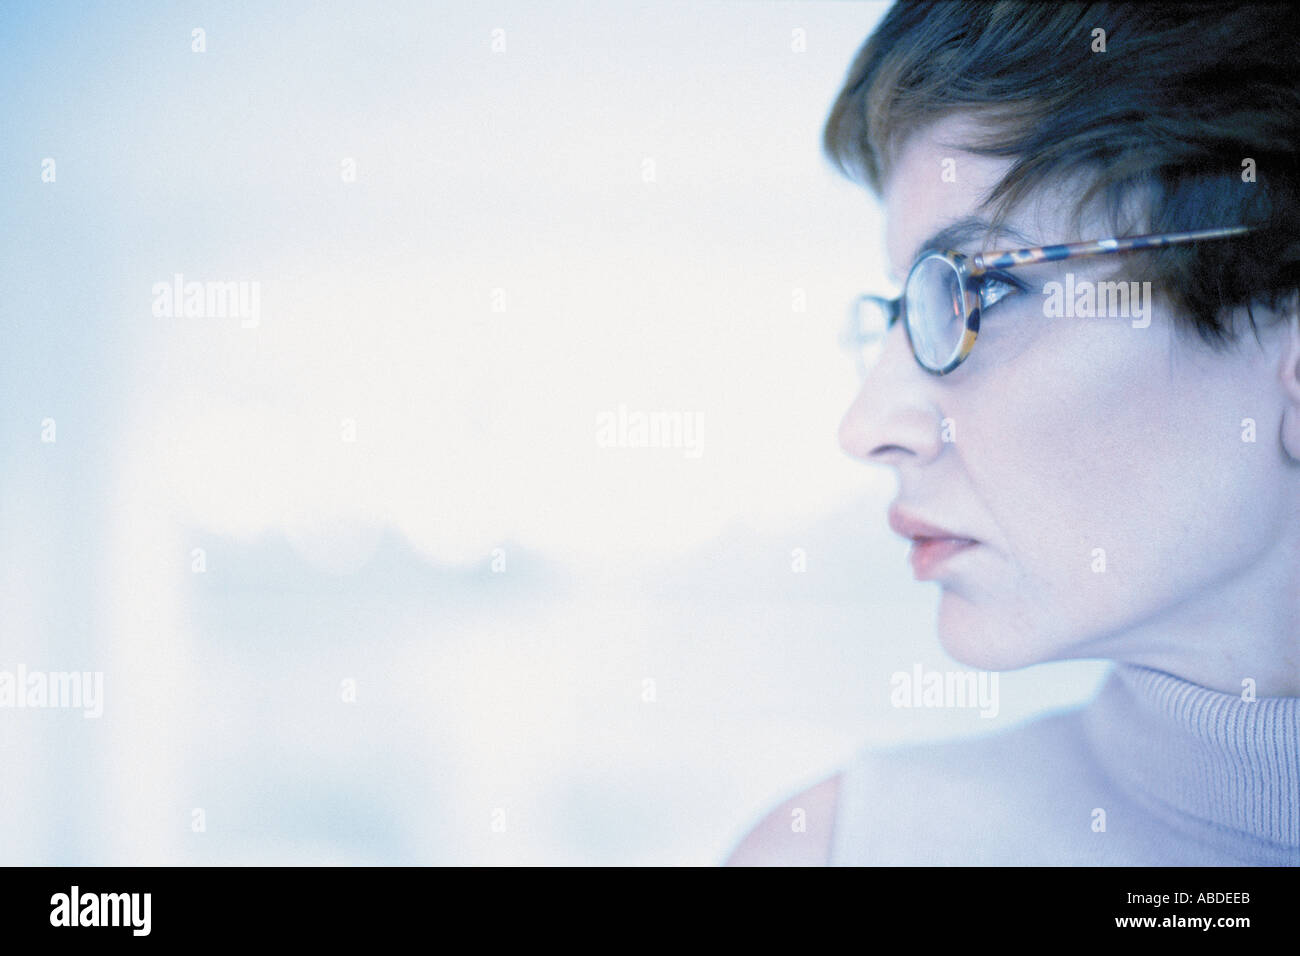 Profile of a woman wearing glasses Stock Photo